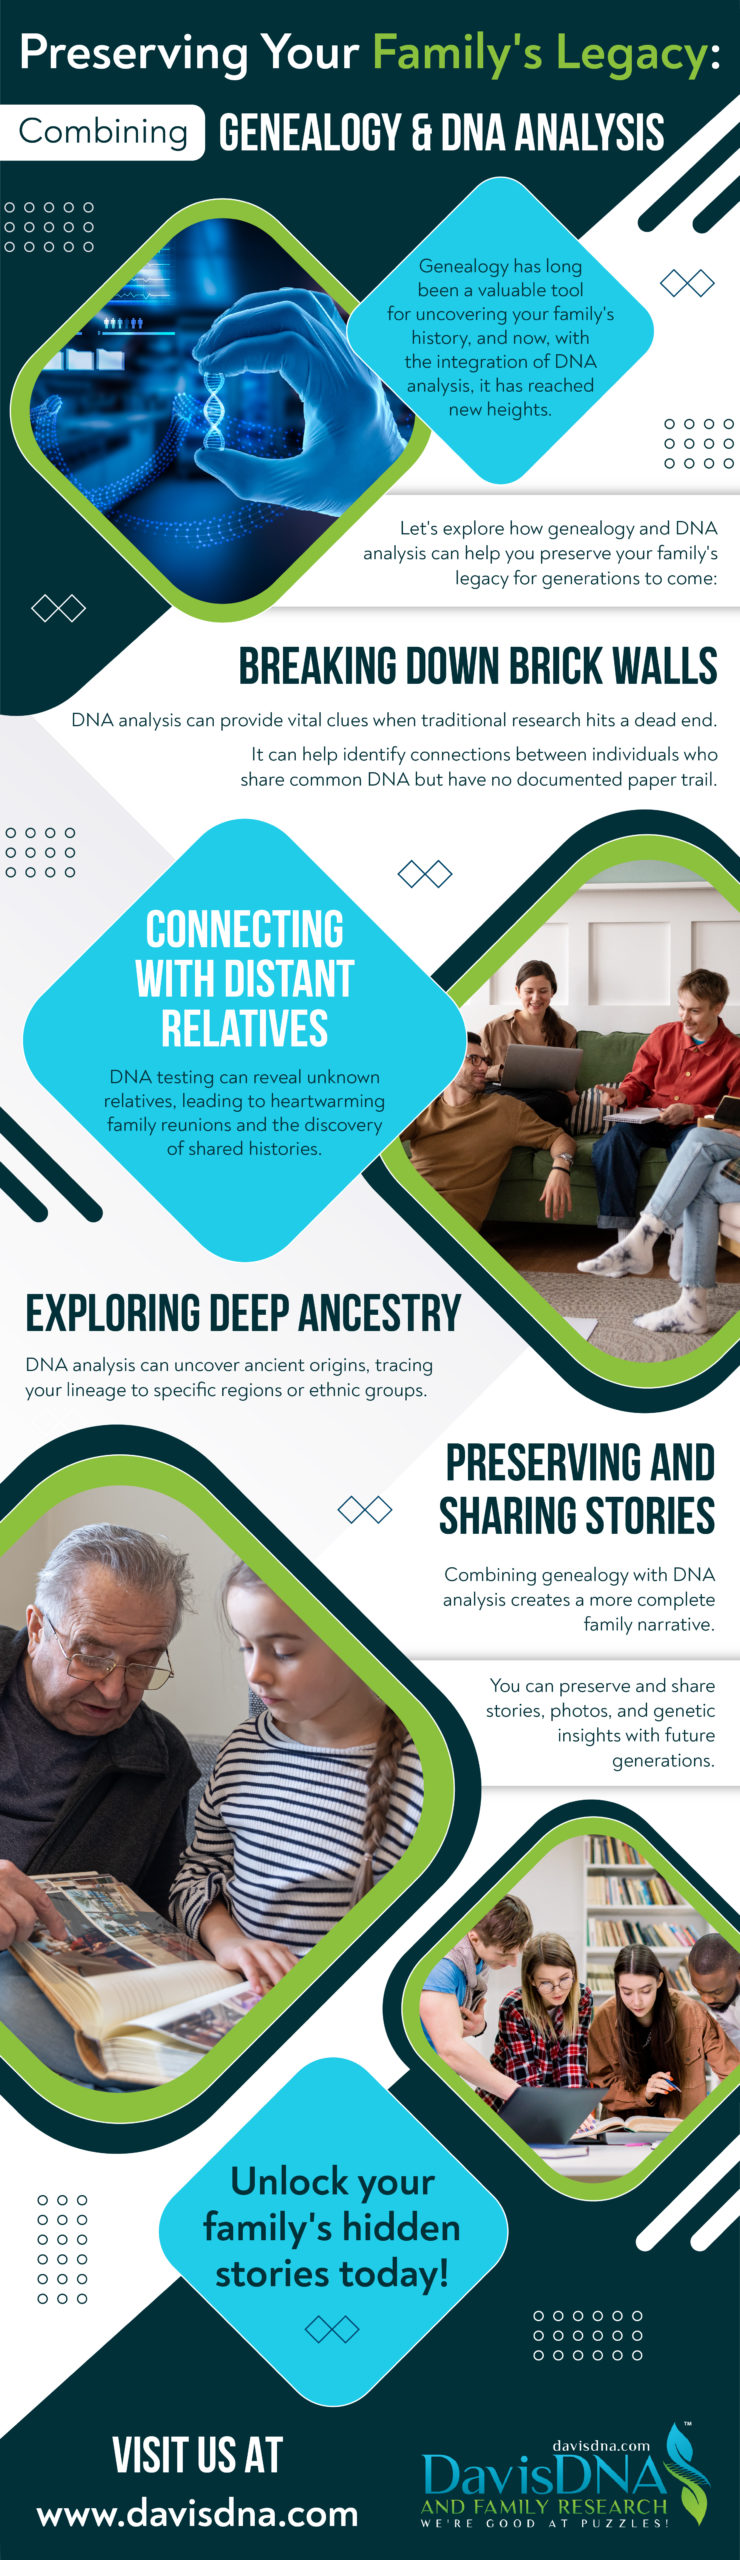 Preserving Your Family's Legacy: Combining Genealogy & DNA Analysis